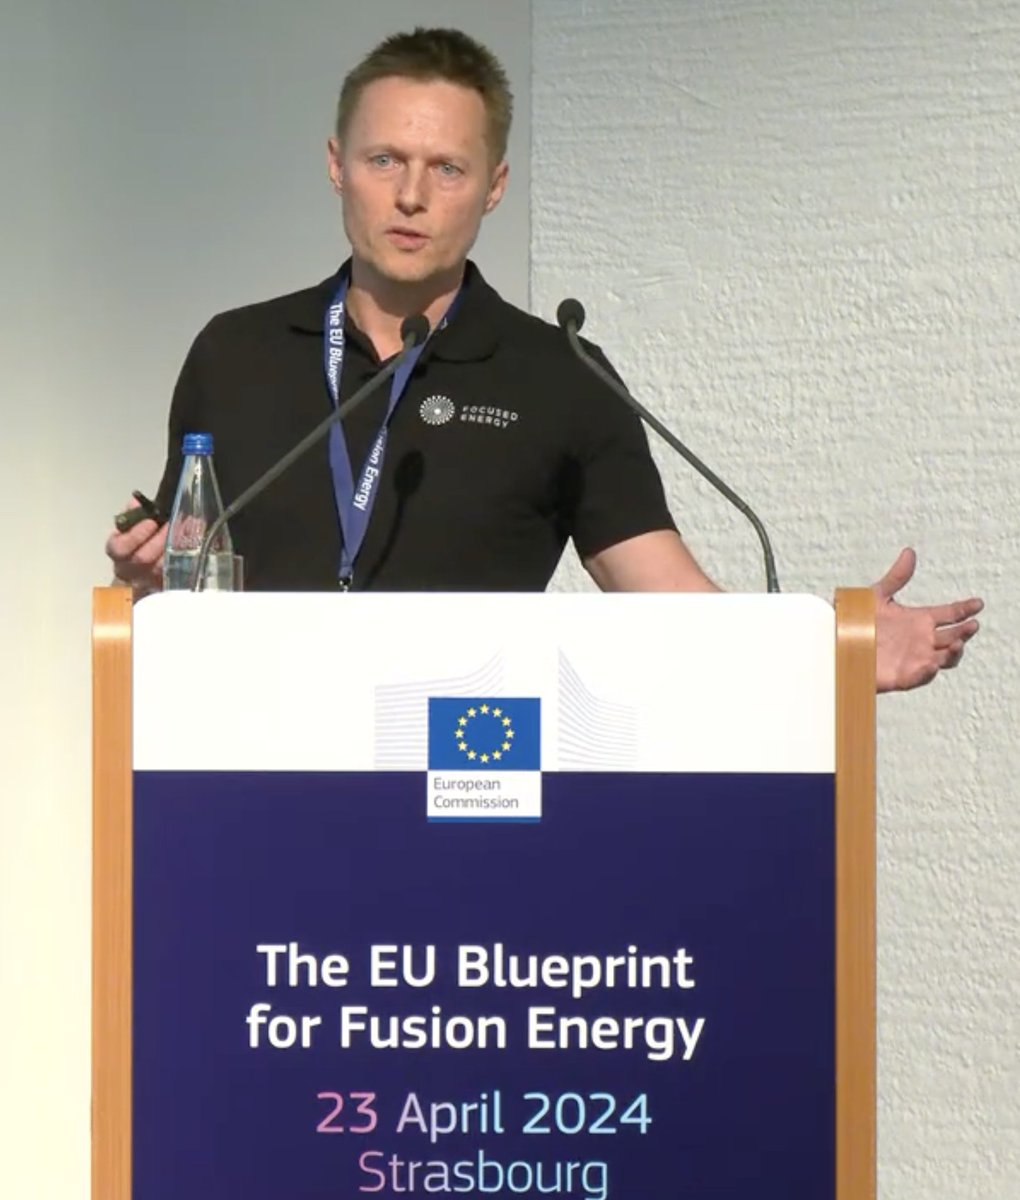 Regulation of #fusion #energy must be specific + separate from nuclear fission, as the processes are fundamentally different, with varying risks and hazard profiles, said our Co-founder and President Thomas Forner at the @EU_Commission in Strasbourg. #EUBlueprint